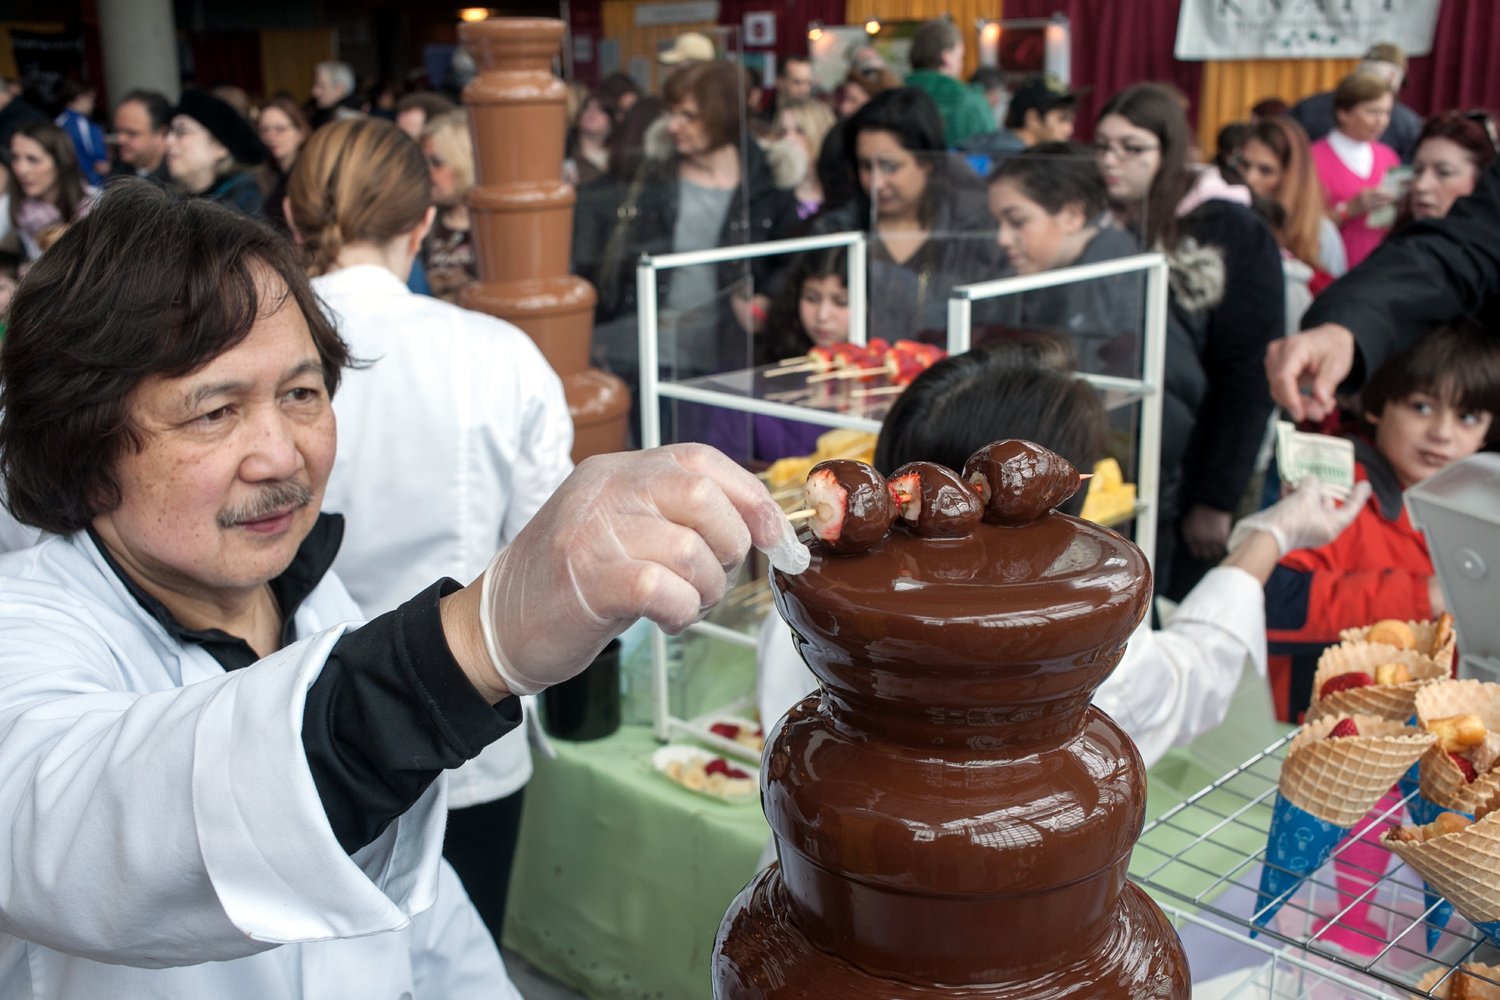 Take your pick. This year’s Chocolate Expo is a showcase of scrumptious bites.